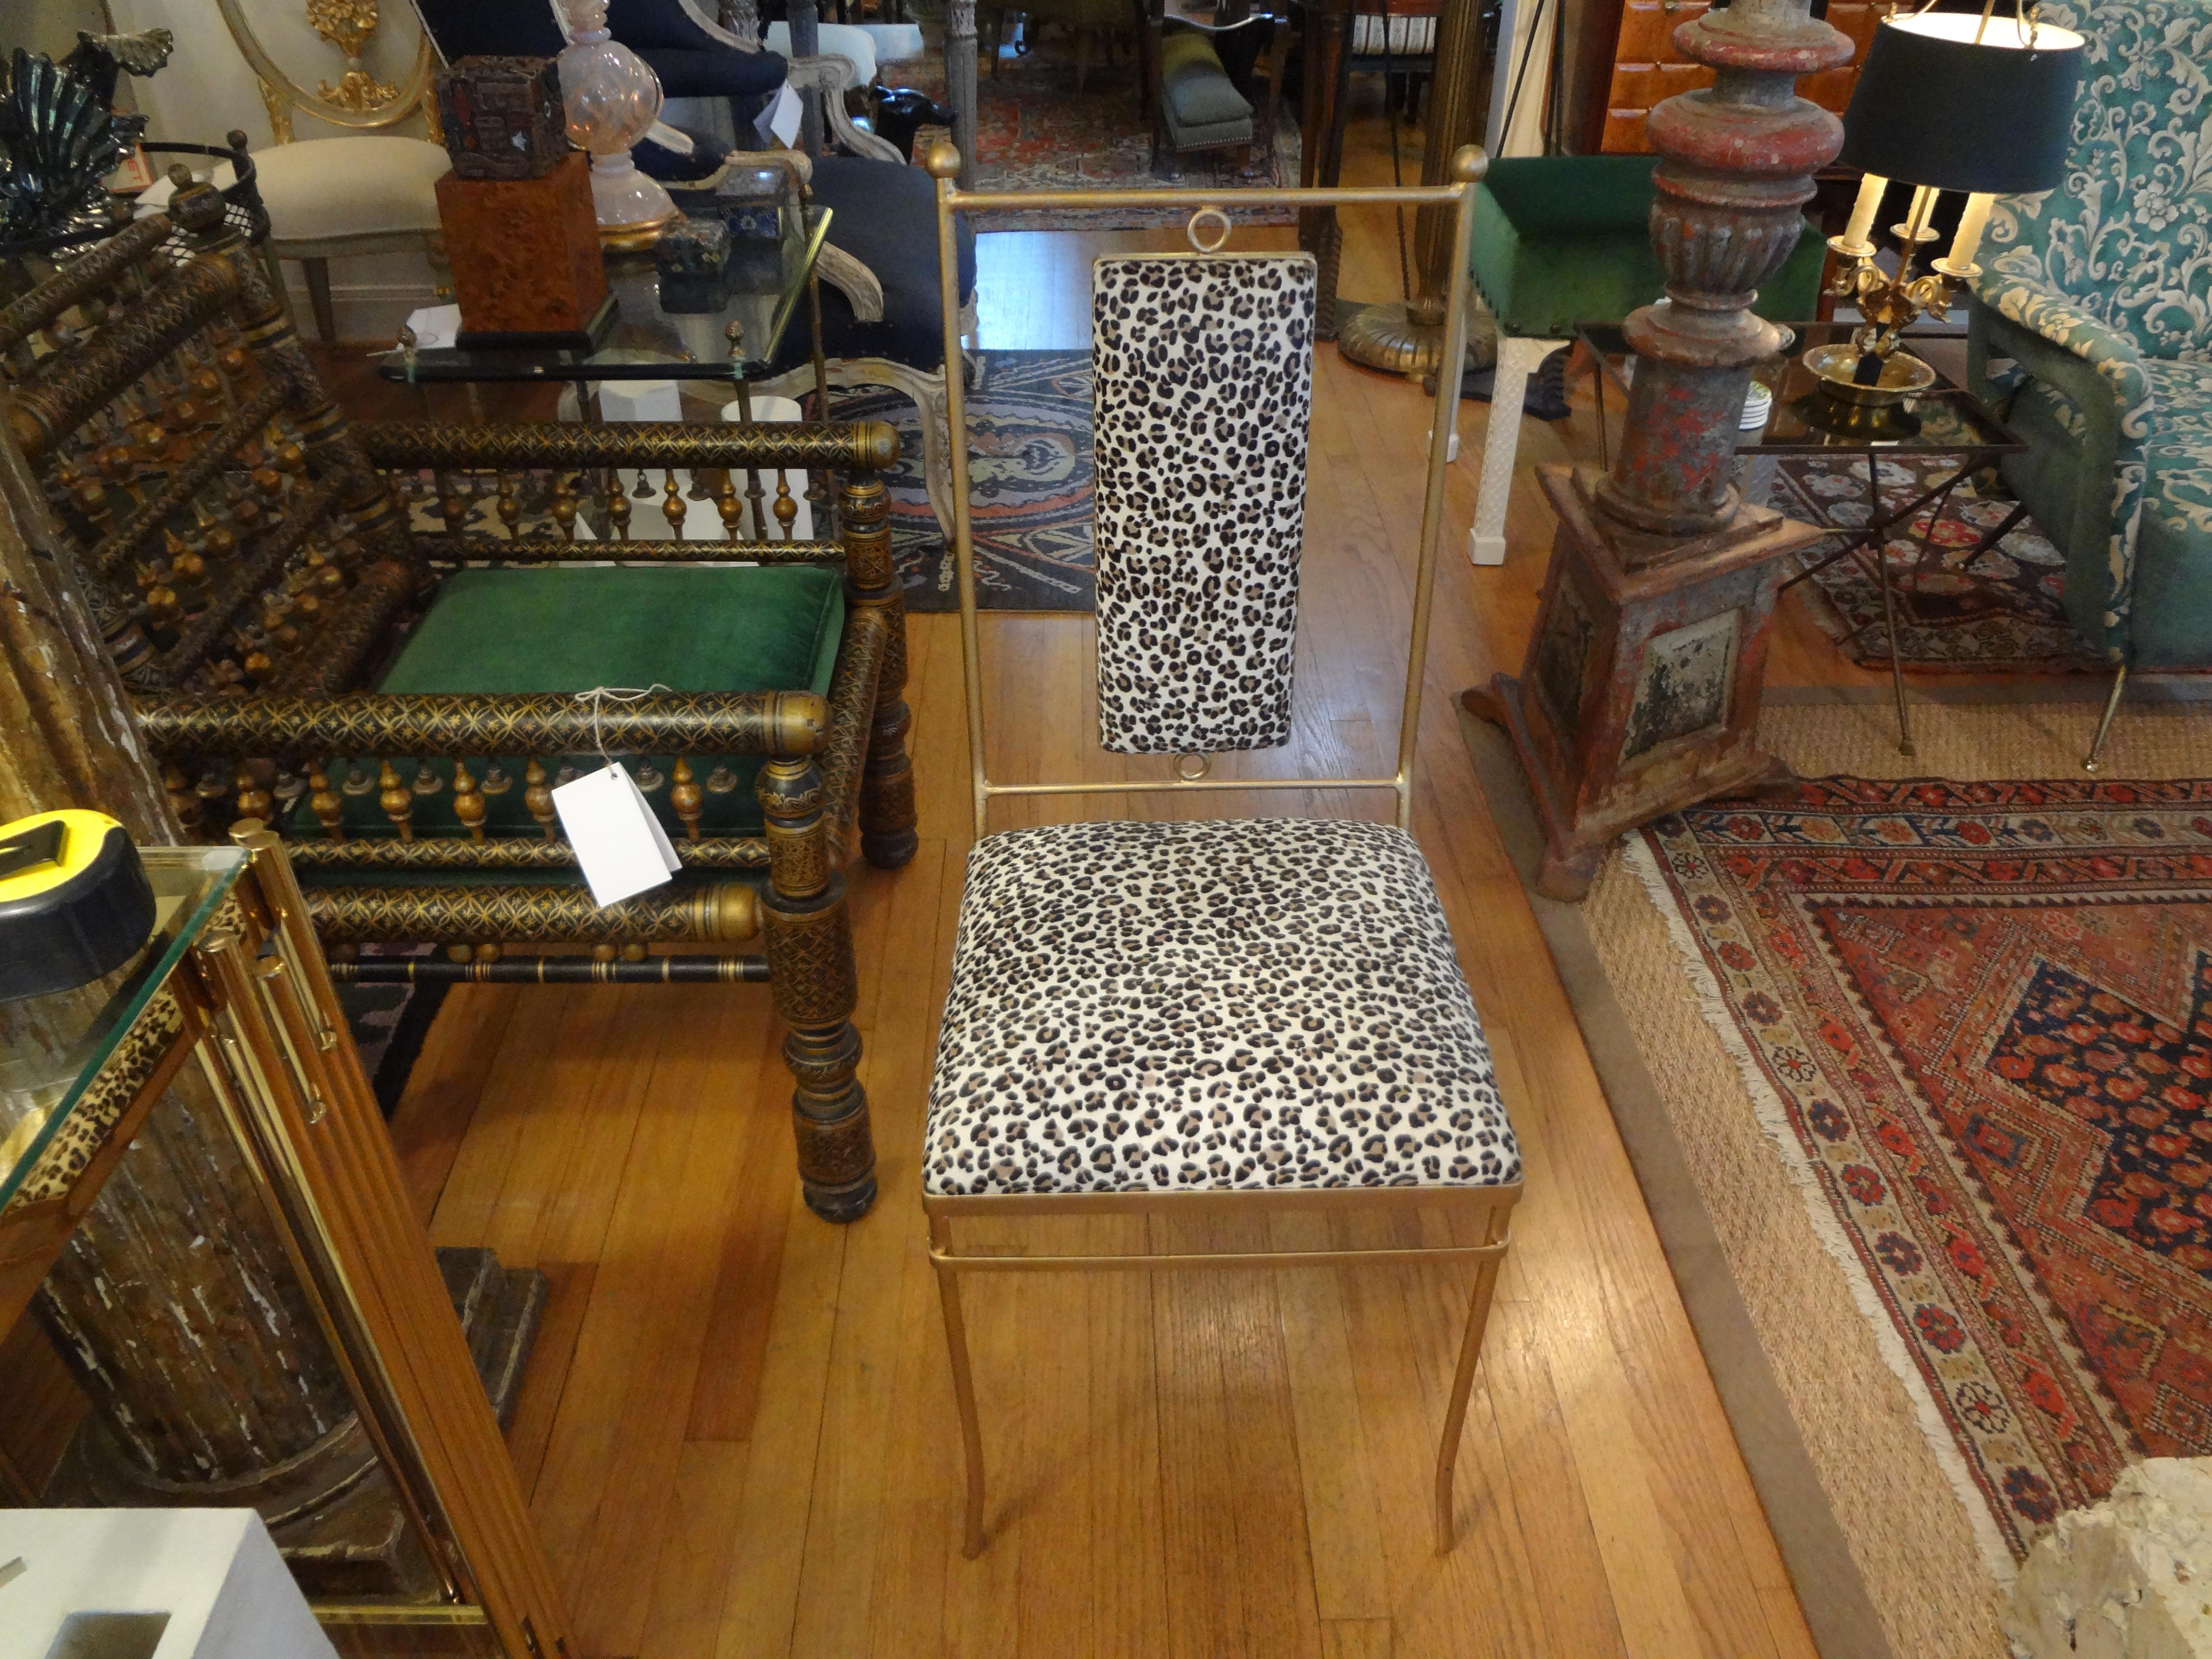 Italian Gilt Iron Chair with Leopard Print Hide Upholstery, Gio Ponti Inspired 2